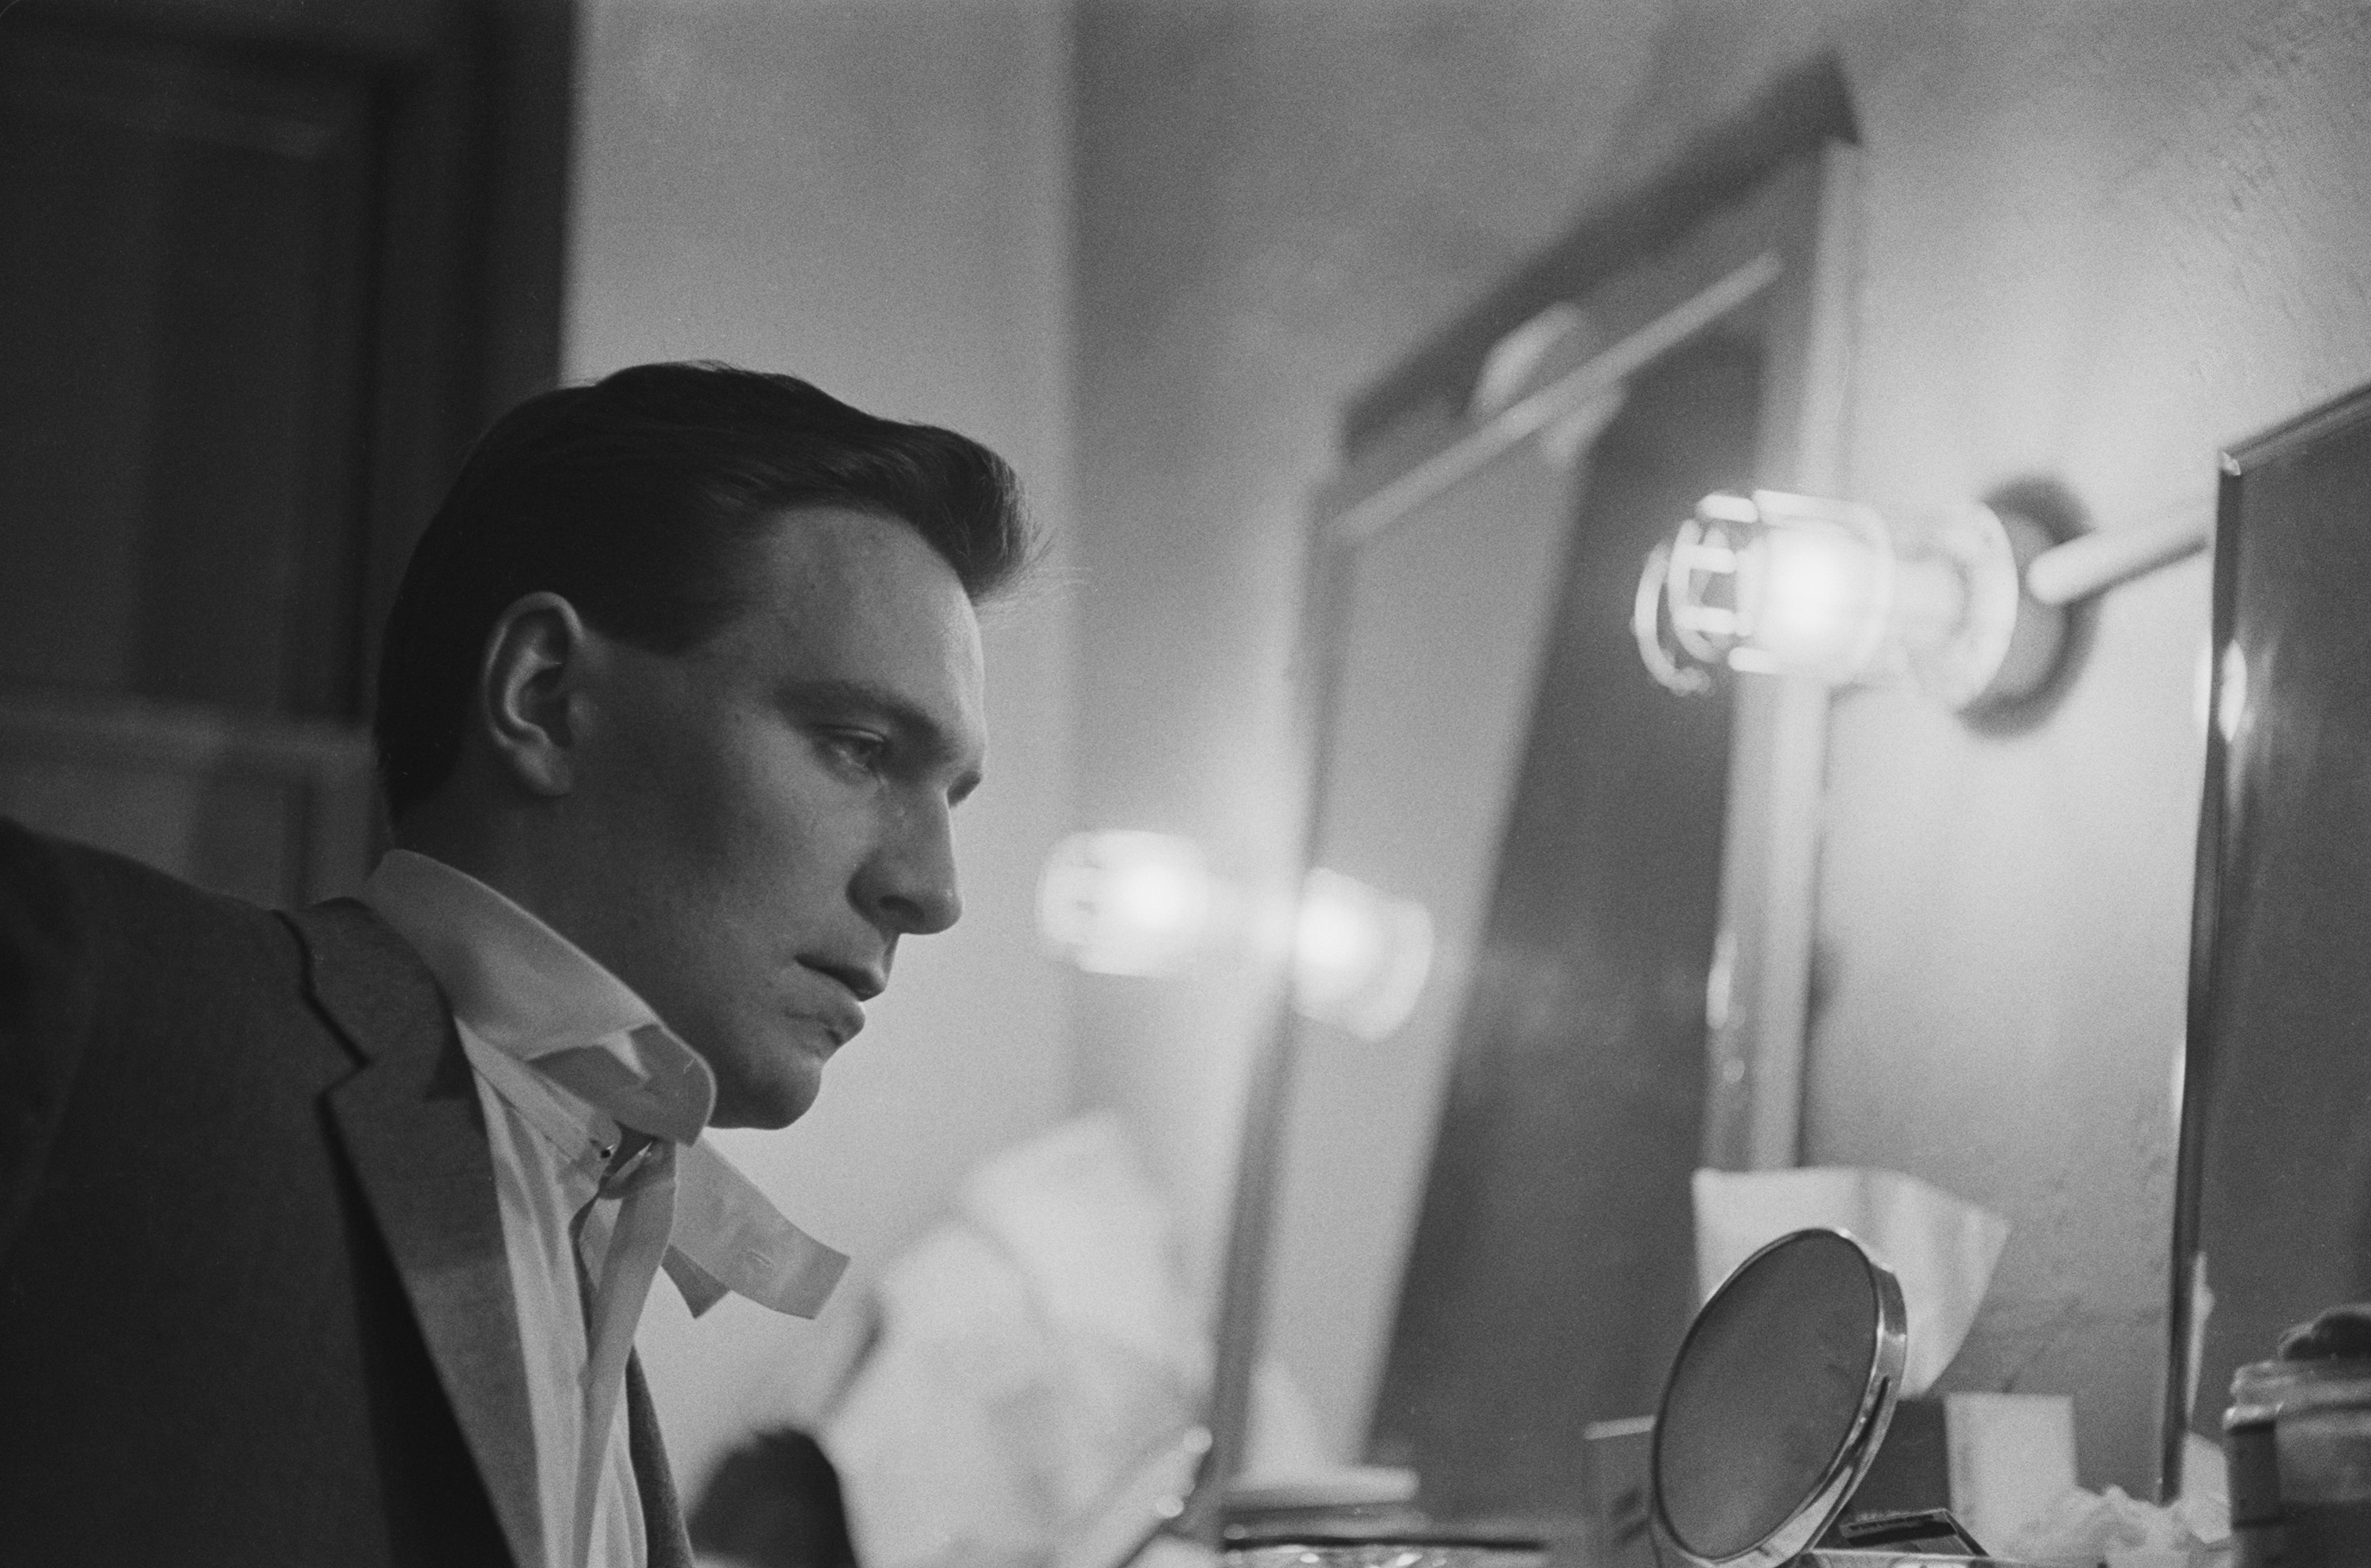 Christopher Plummer in a tuxedo looking past a mirror backstage at a broadway show